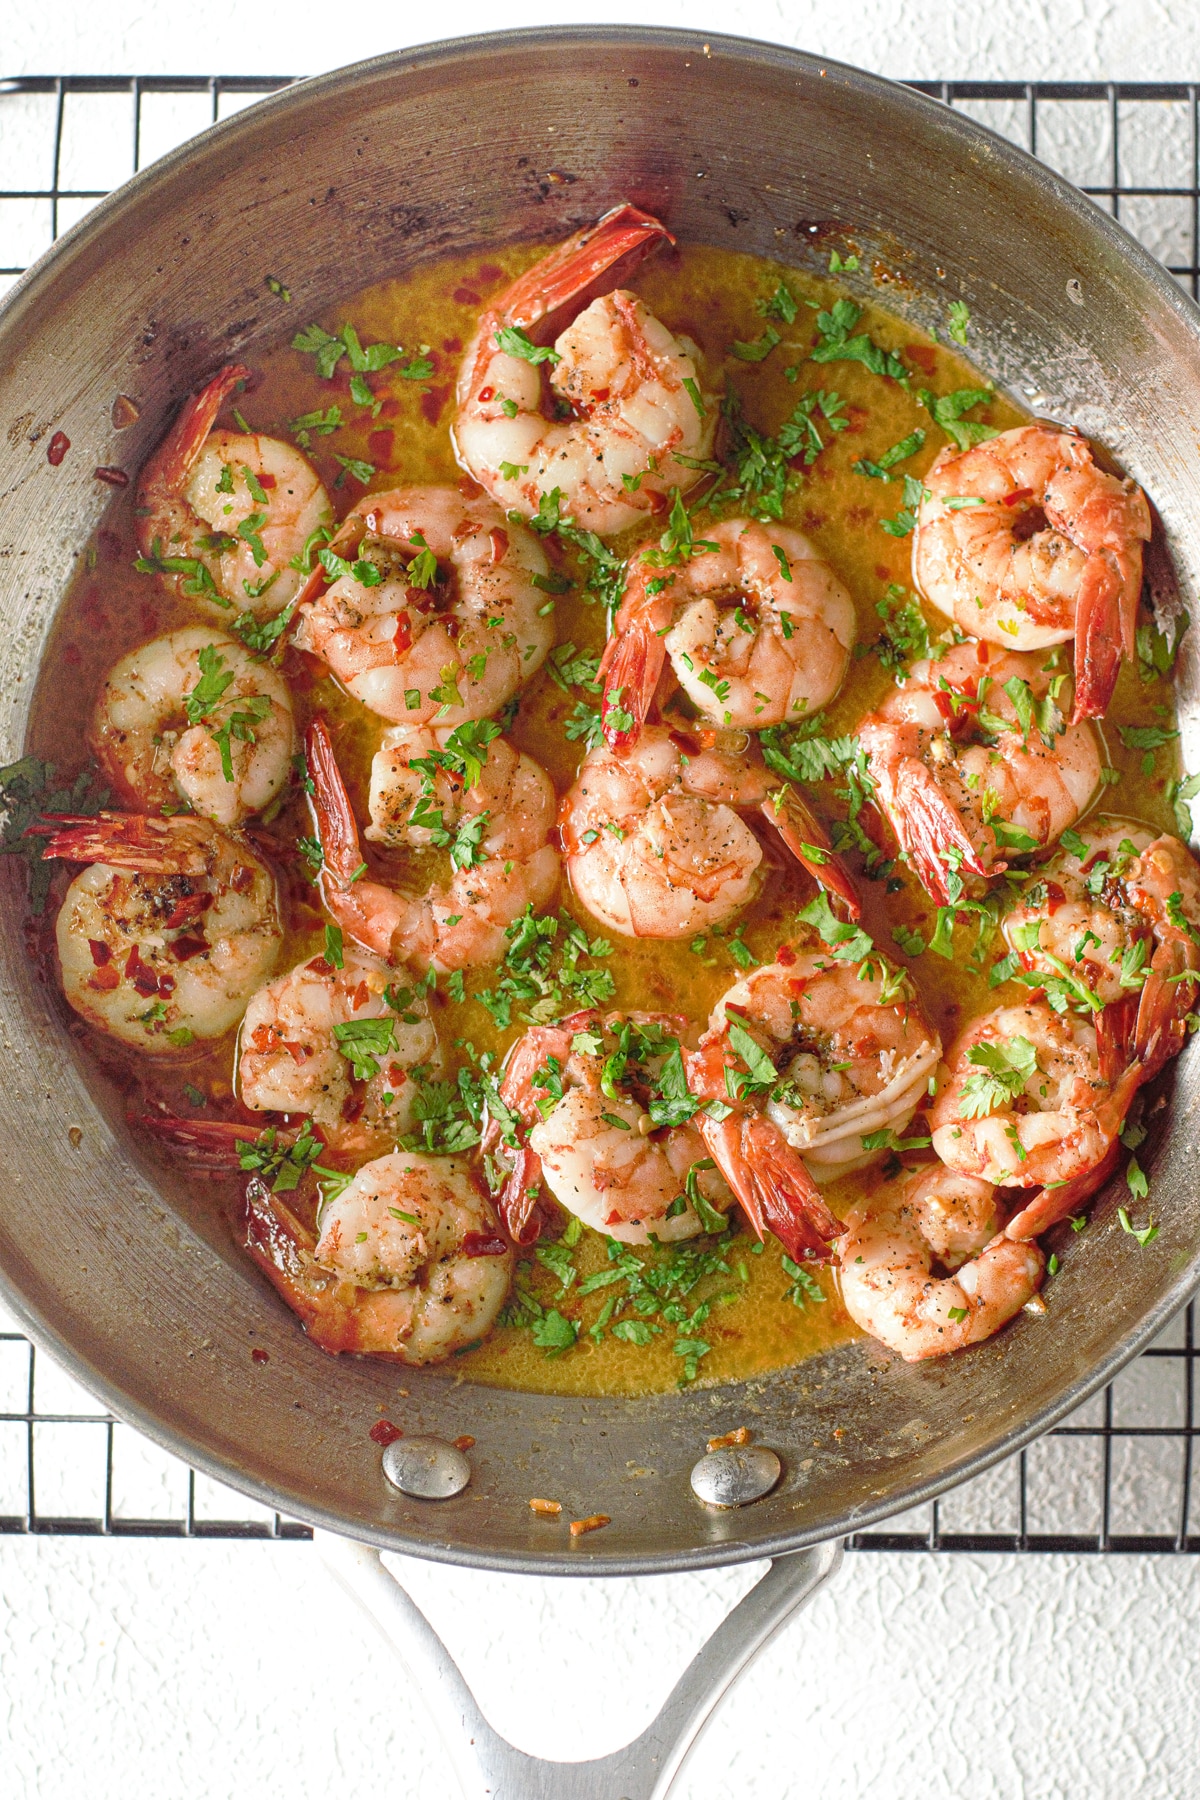 Another process is to add a sauce to the shrimps.